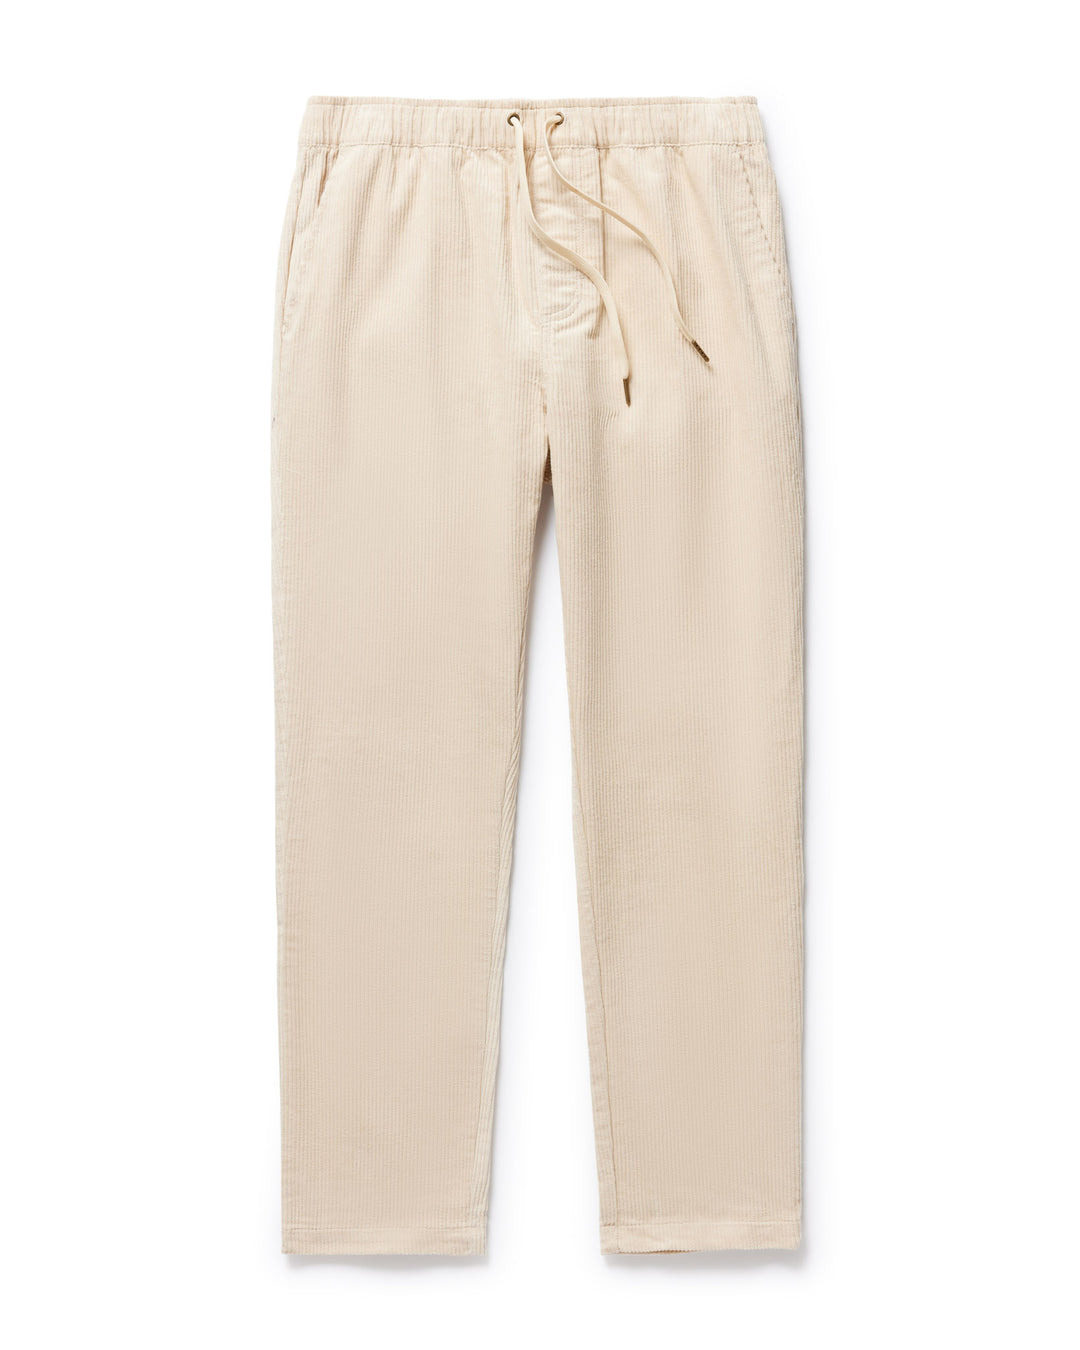 A pair of Dandy Del Mar's Corsica Corduroy Pant in Alabaster White on a white background.